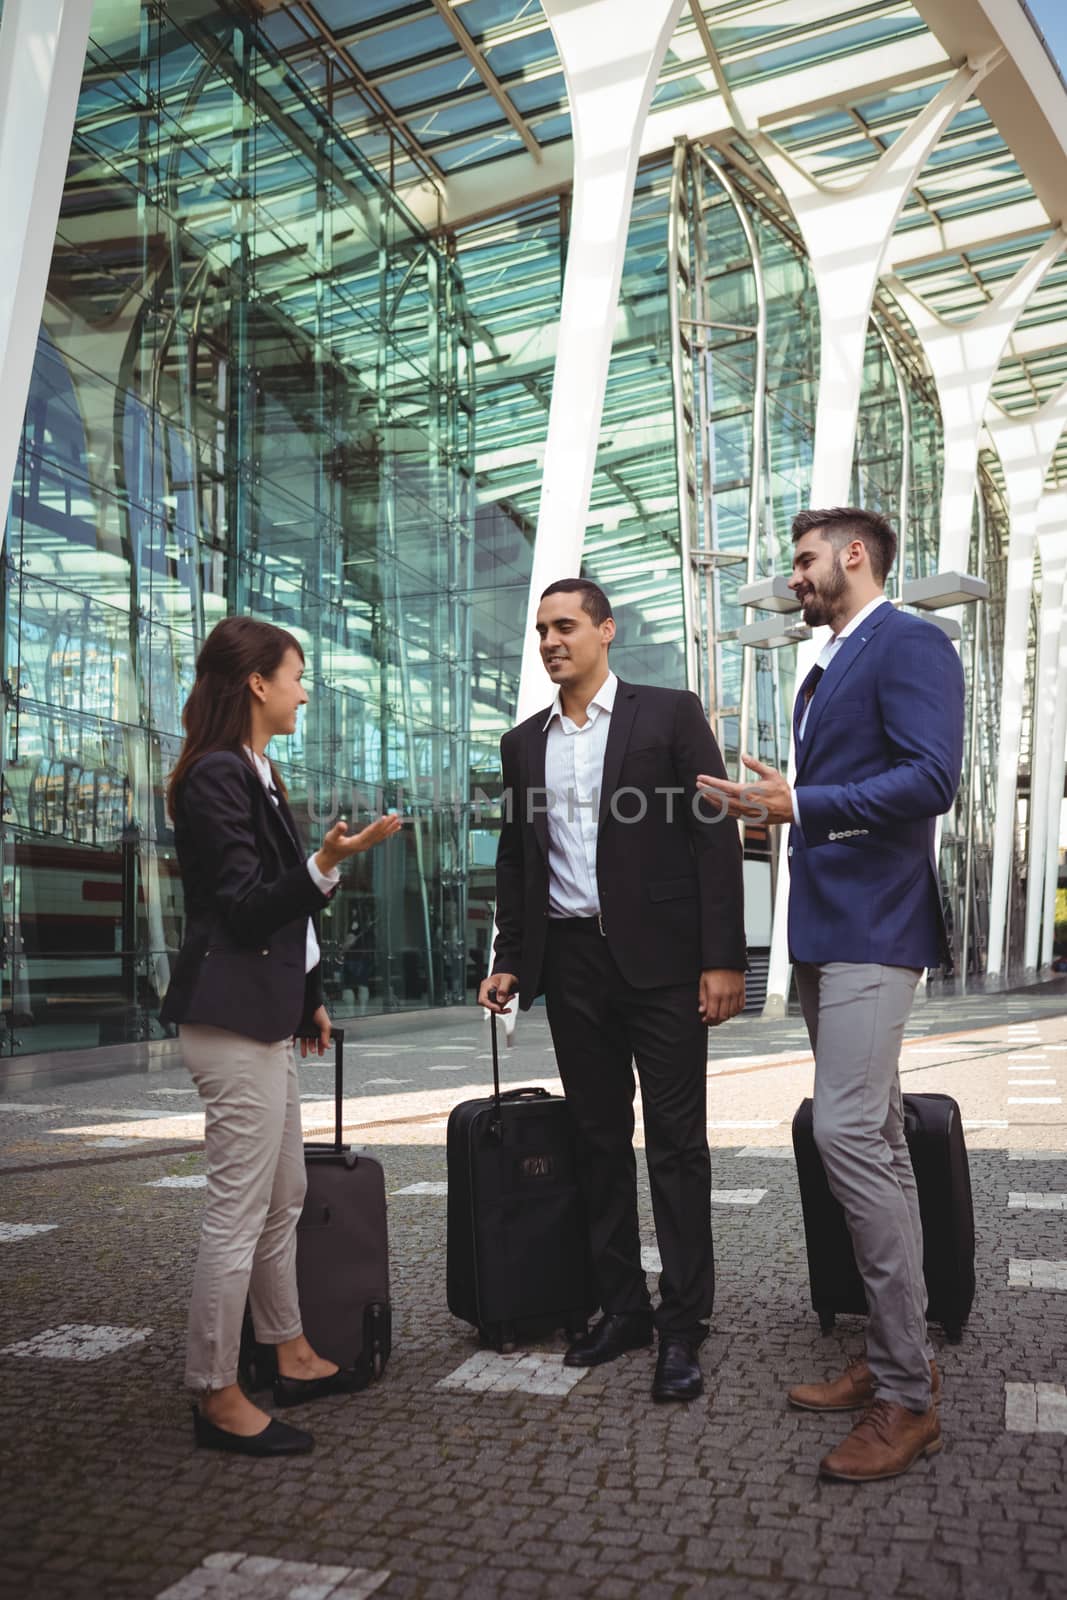 Smiling business executives interacting with each other outside platform